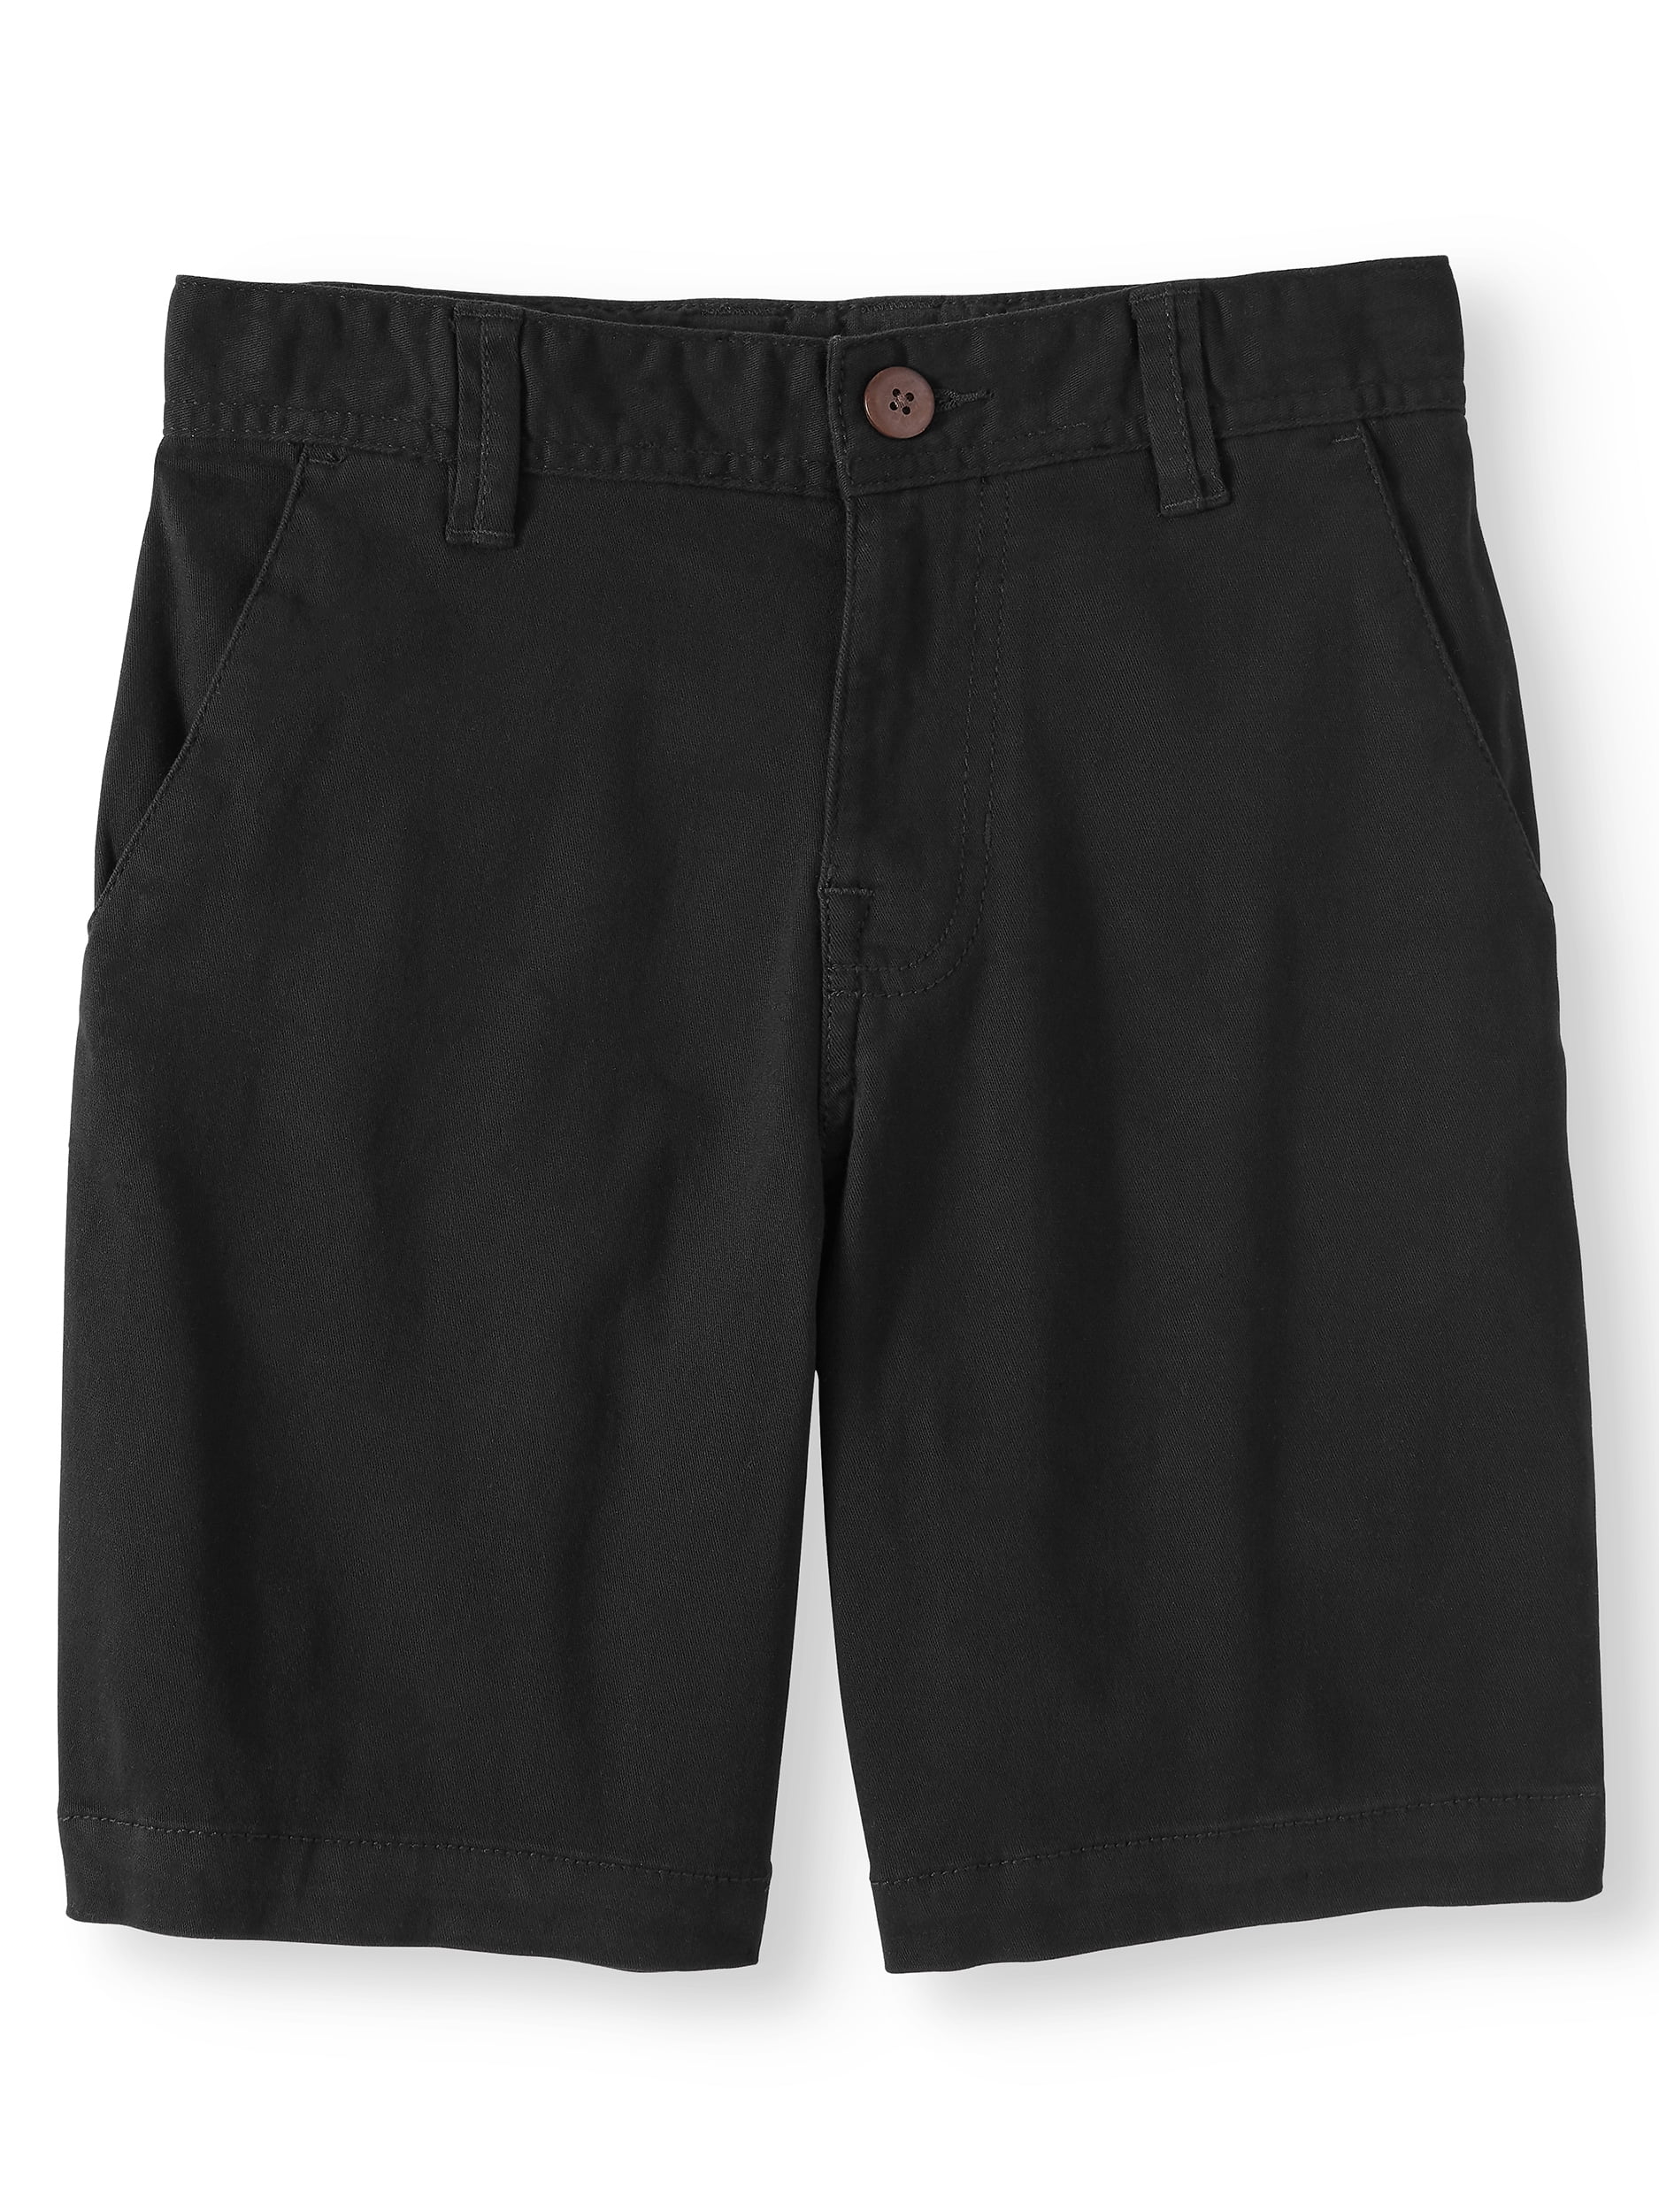 Details about   Boys Wonder Nation School Uniform Shorts Size 16 New With Tag 